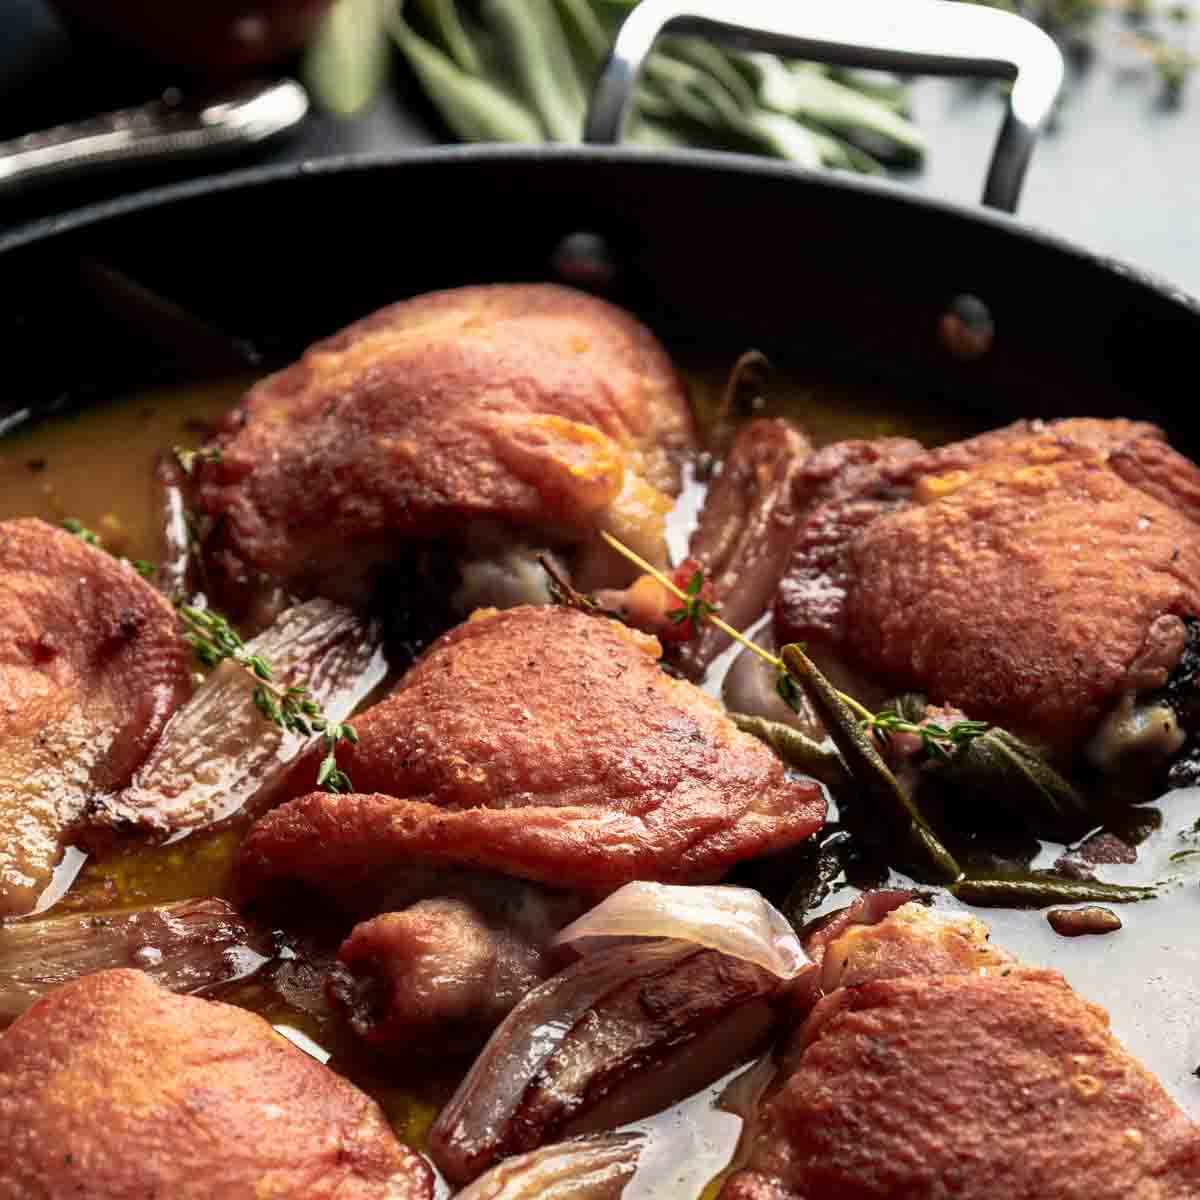 Cider braised chicken thighs in the pan